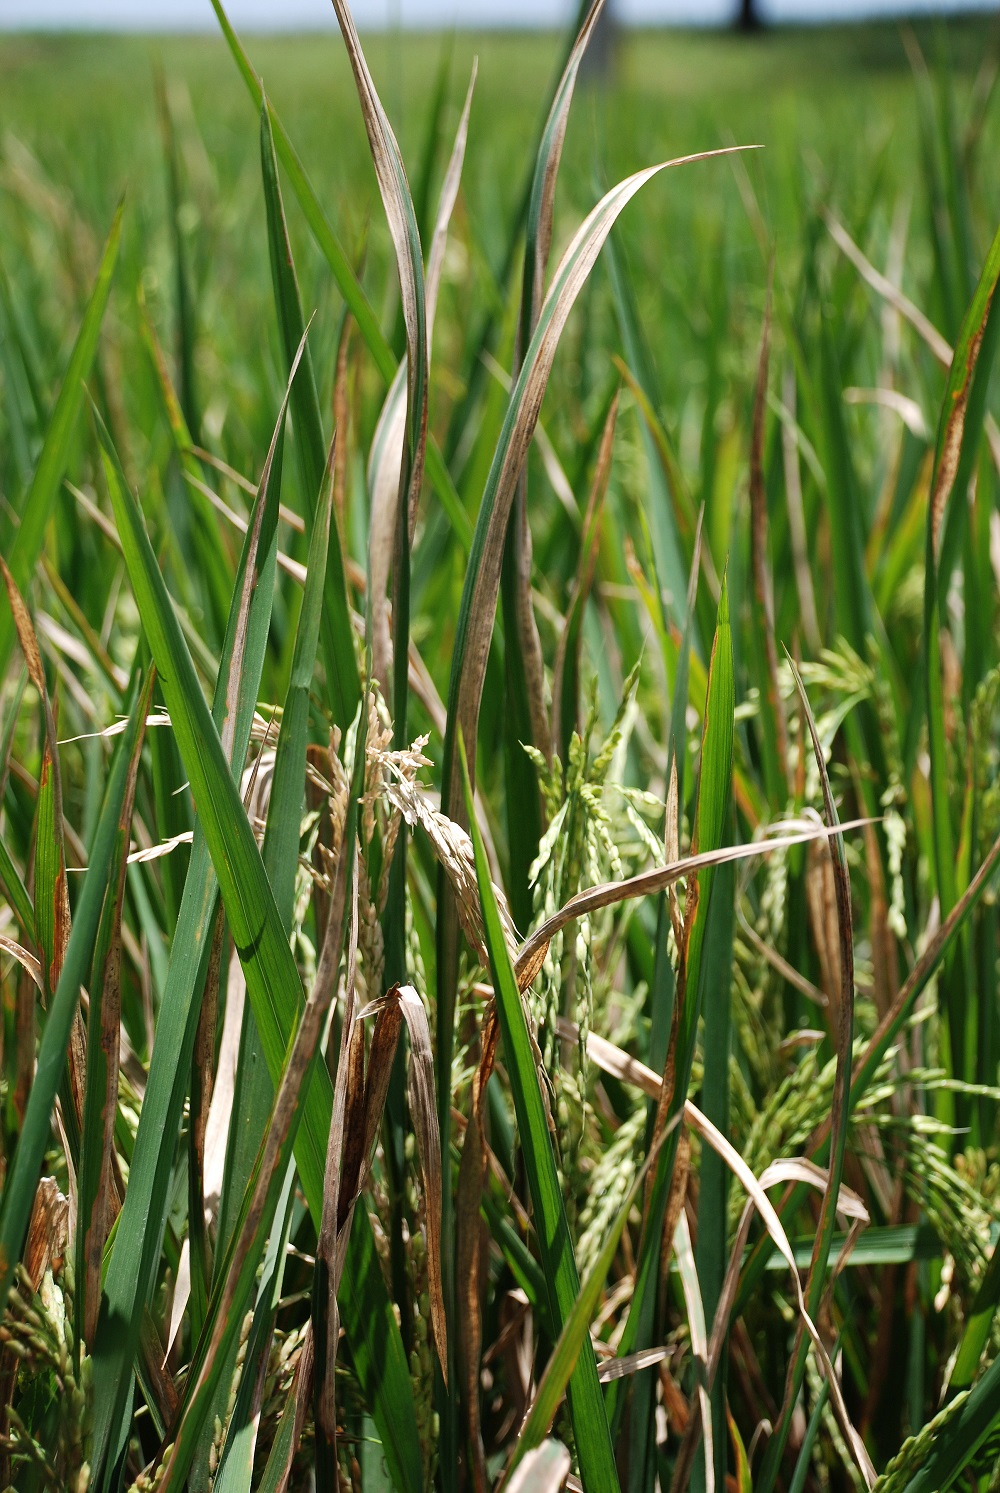 Rice plants with advanced symptoms of bacterial blight. (Photo by Nancy Castilla, IRRI)